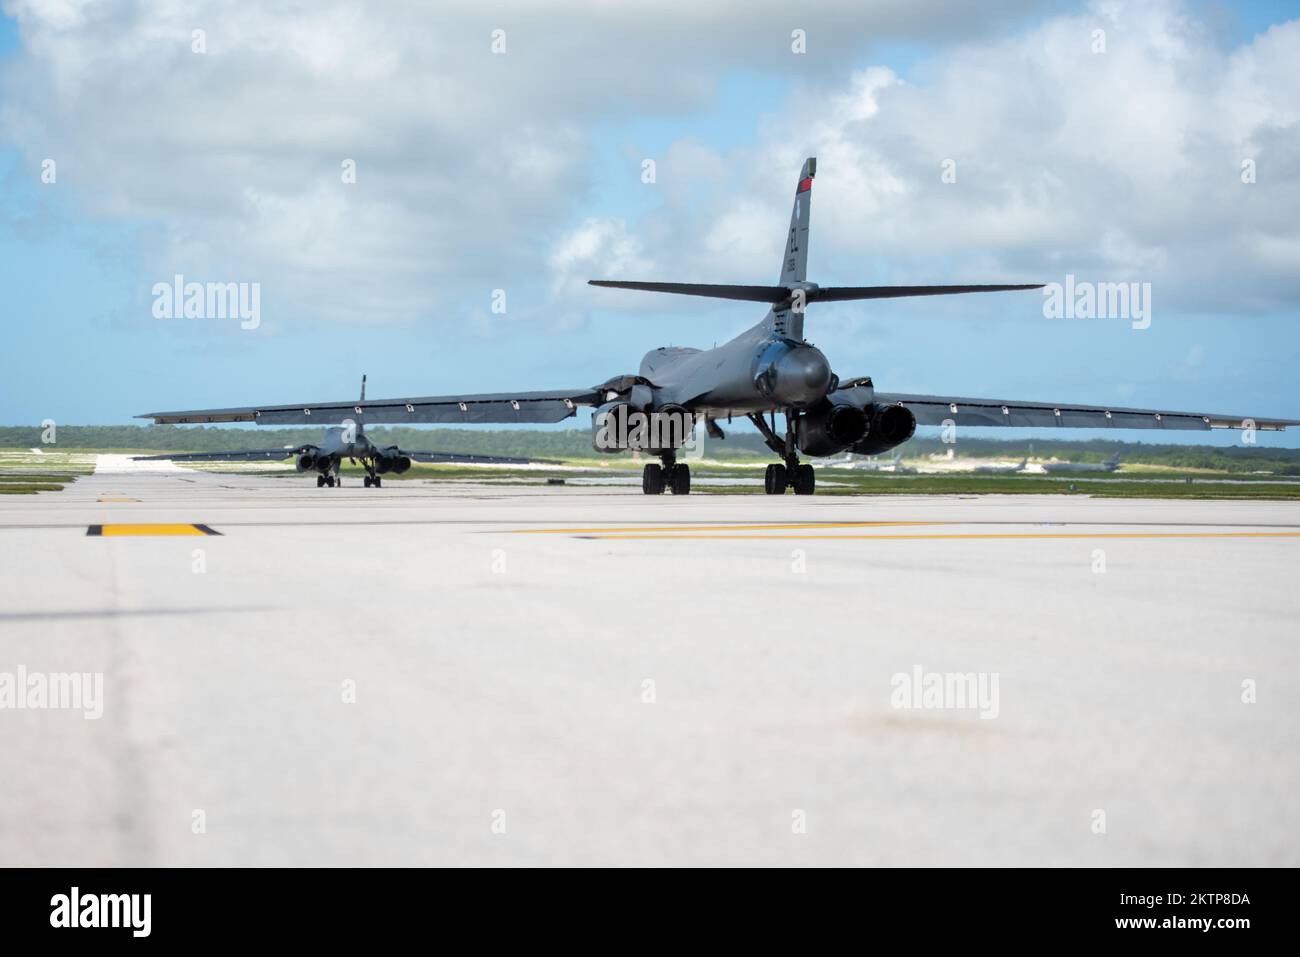 U.S. Air Force B-1B Lancers assigned to the 37th Expeditionary Bomb Squadron, Ellsworth Air Force Base, South Dakota, taxi down the flight line in support of a Bomber Task Force mission at Andersen AFB, Guam, Nov. 19, 2022. The U.S. Air Force is committed to upholding a rules-based, free and open Indo-Pacific that respects every nation and ensures the peaceful resolution of disputes free from coercion. (U.S. Air Force Photo by Senior Airman Yosselin Campos) Stock Photo